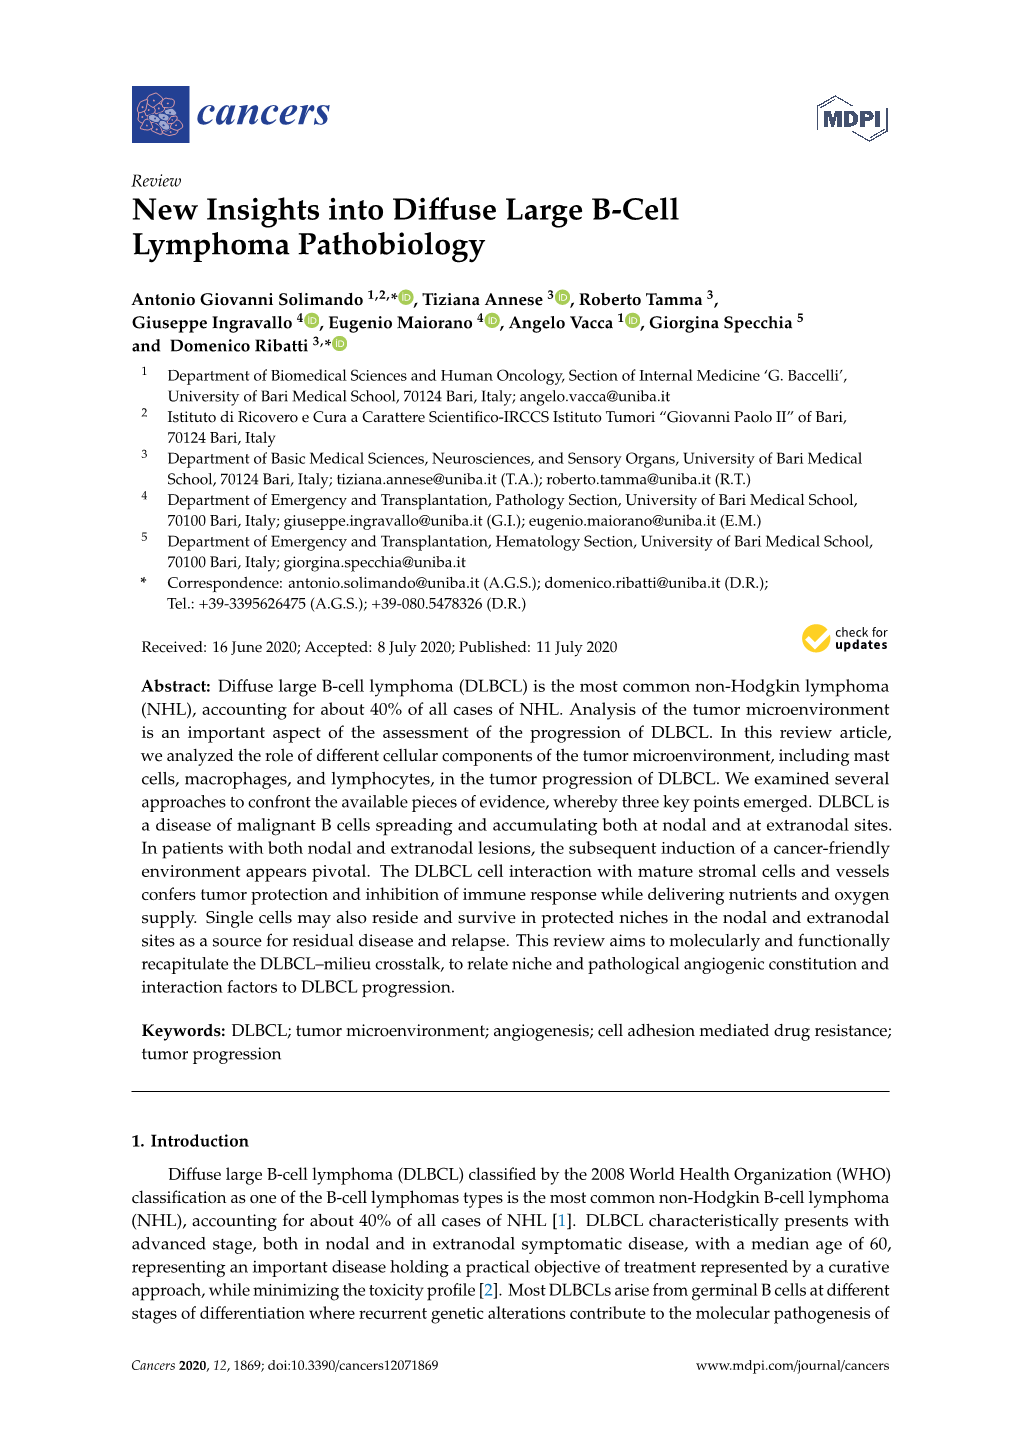 New Insights Into Diffuse Large B-Cell Lymphoma Pathobiology